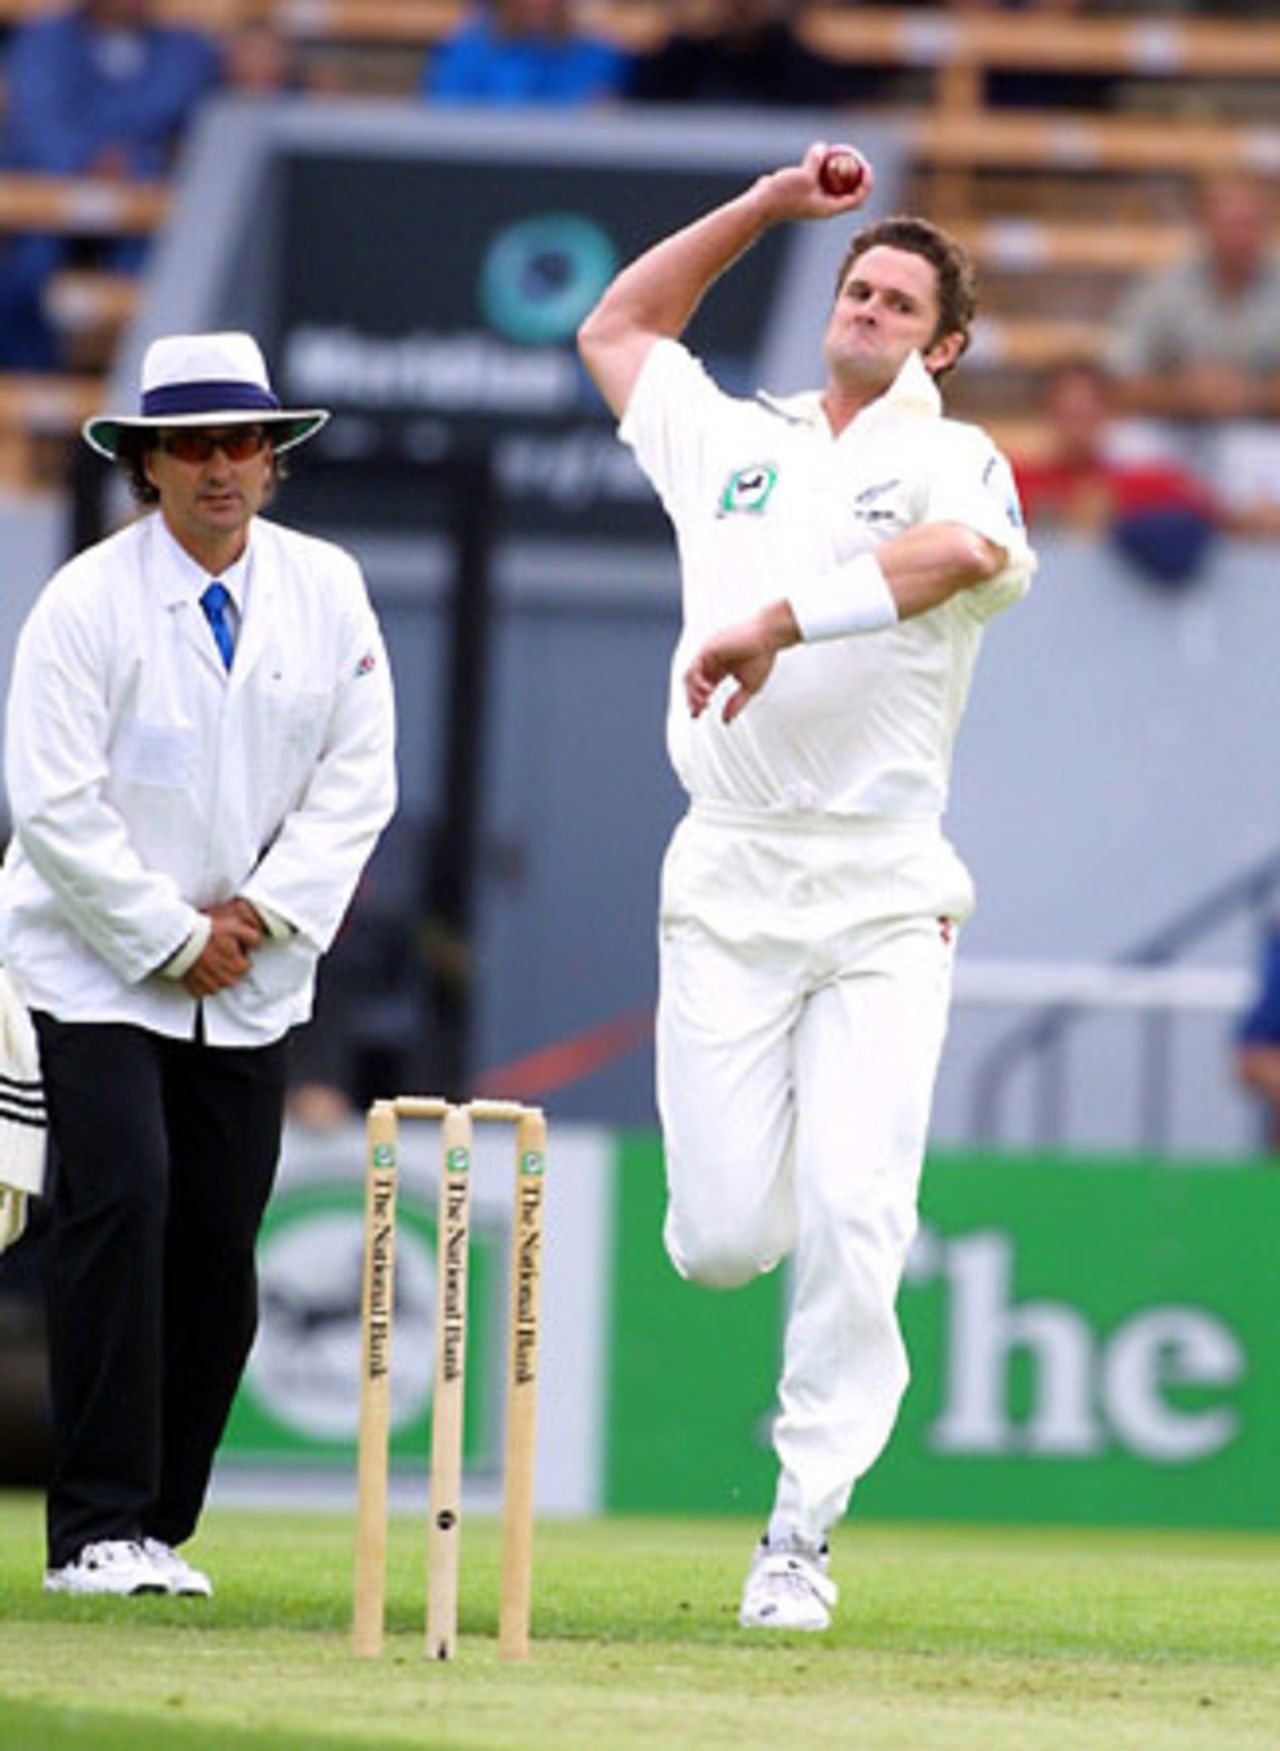 New Zealand bowler Chris Cairns delivers a ball during his first innings spell of 3-58 from 15 overs while umpire Brent Bowden looks on. 1st Test: New Zealand v England at Jade Stadium, Christchurch, 13-17 March 2002 (13 March 2002).